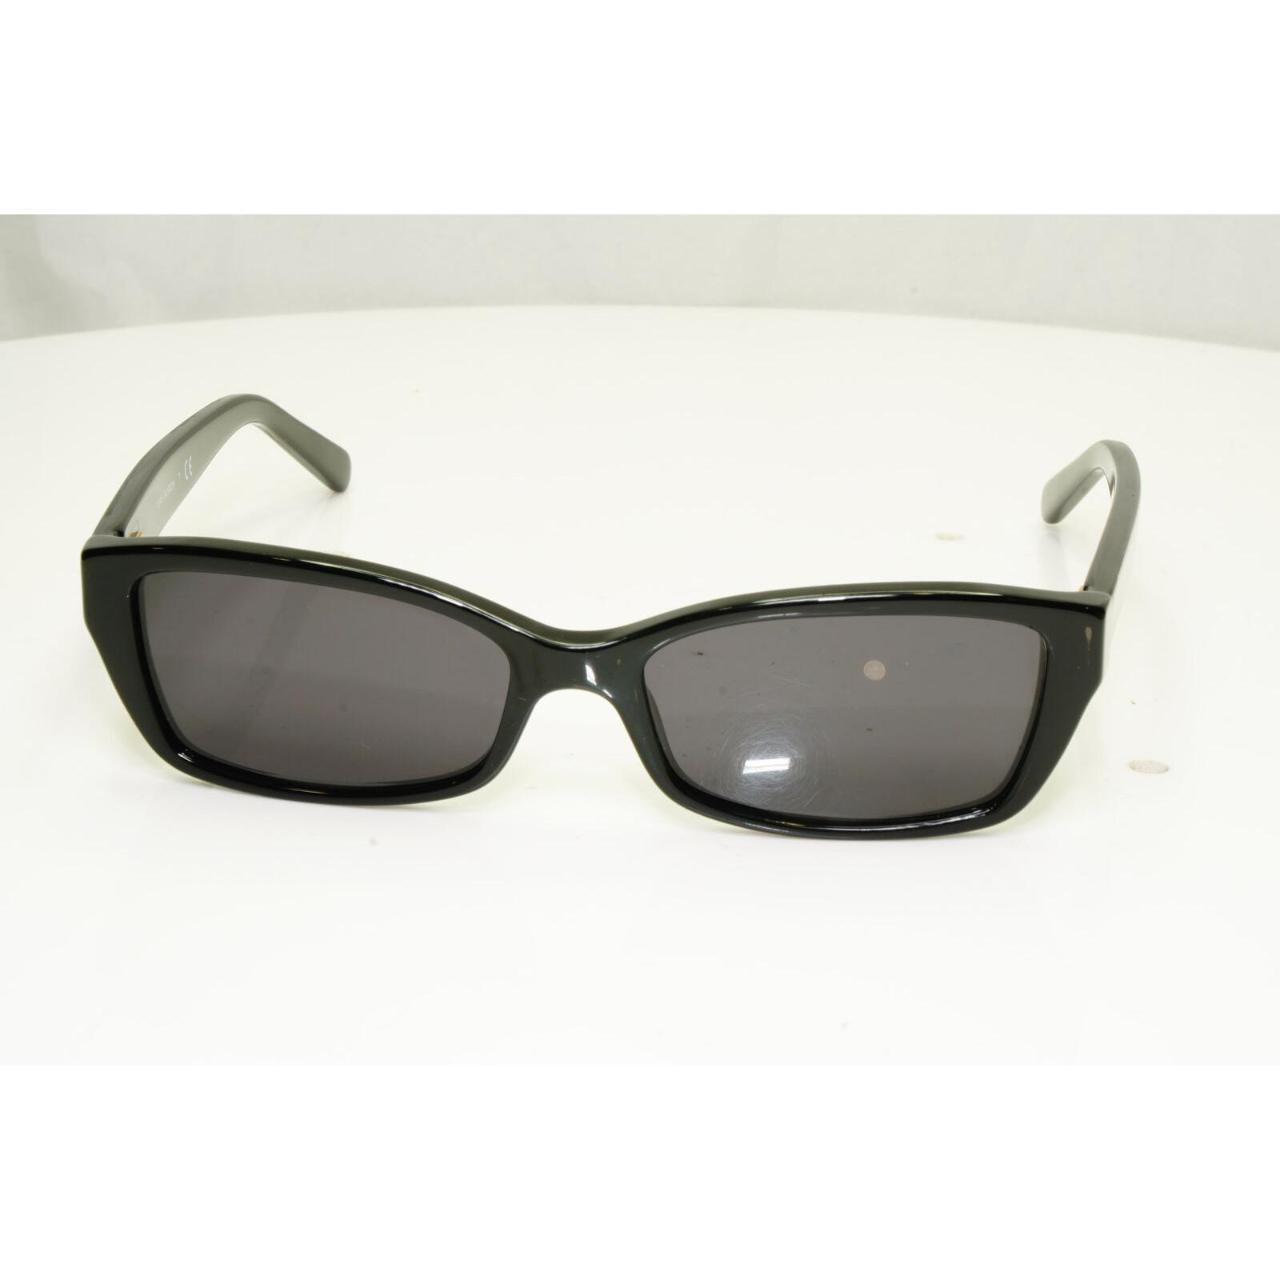 Product Image 4 - These sunglasses and all other